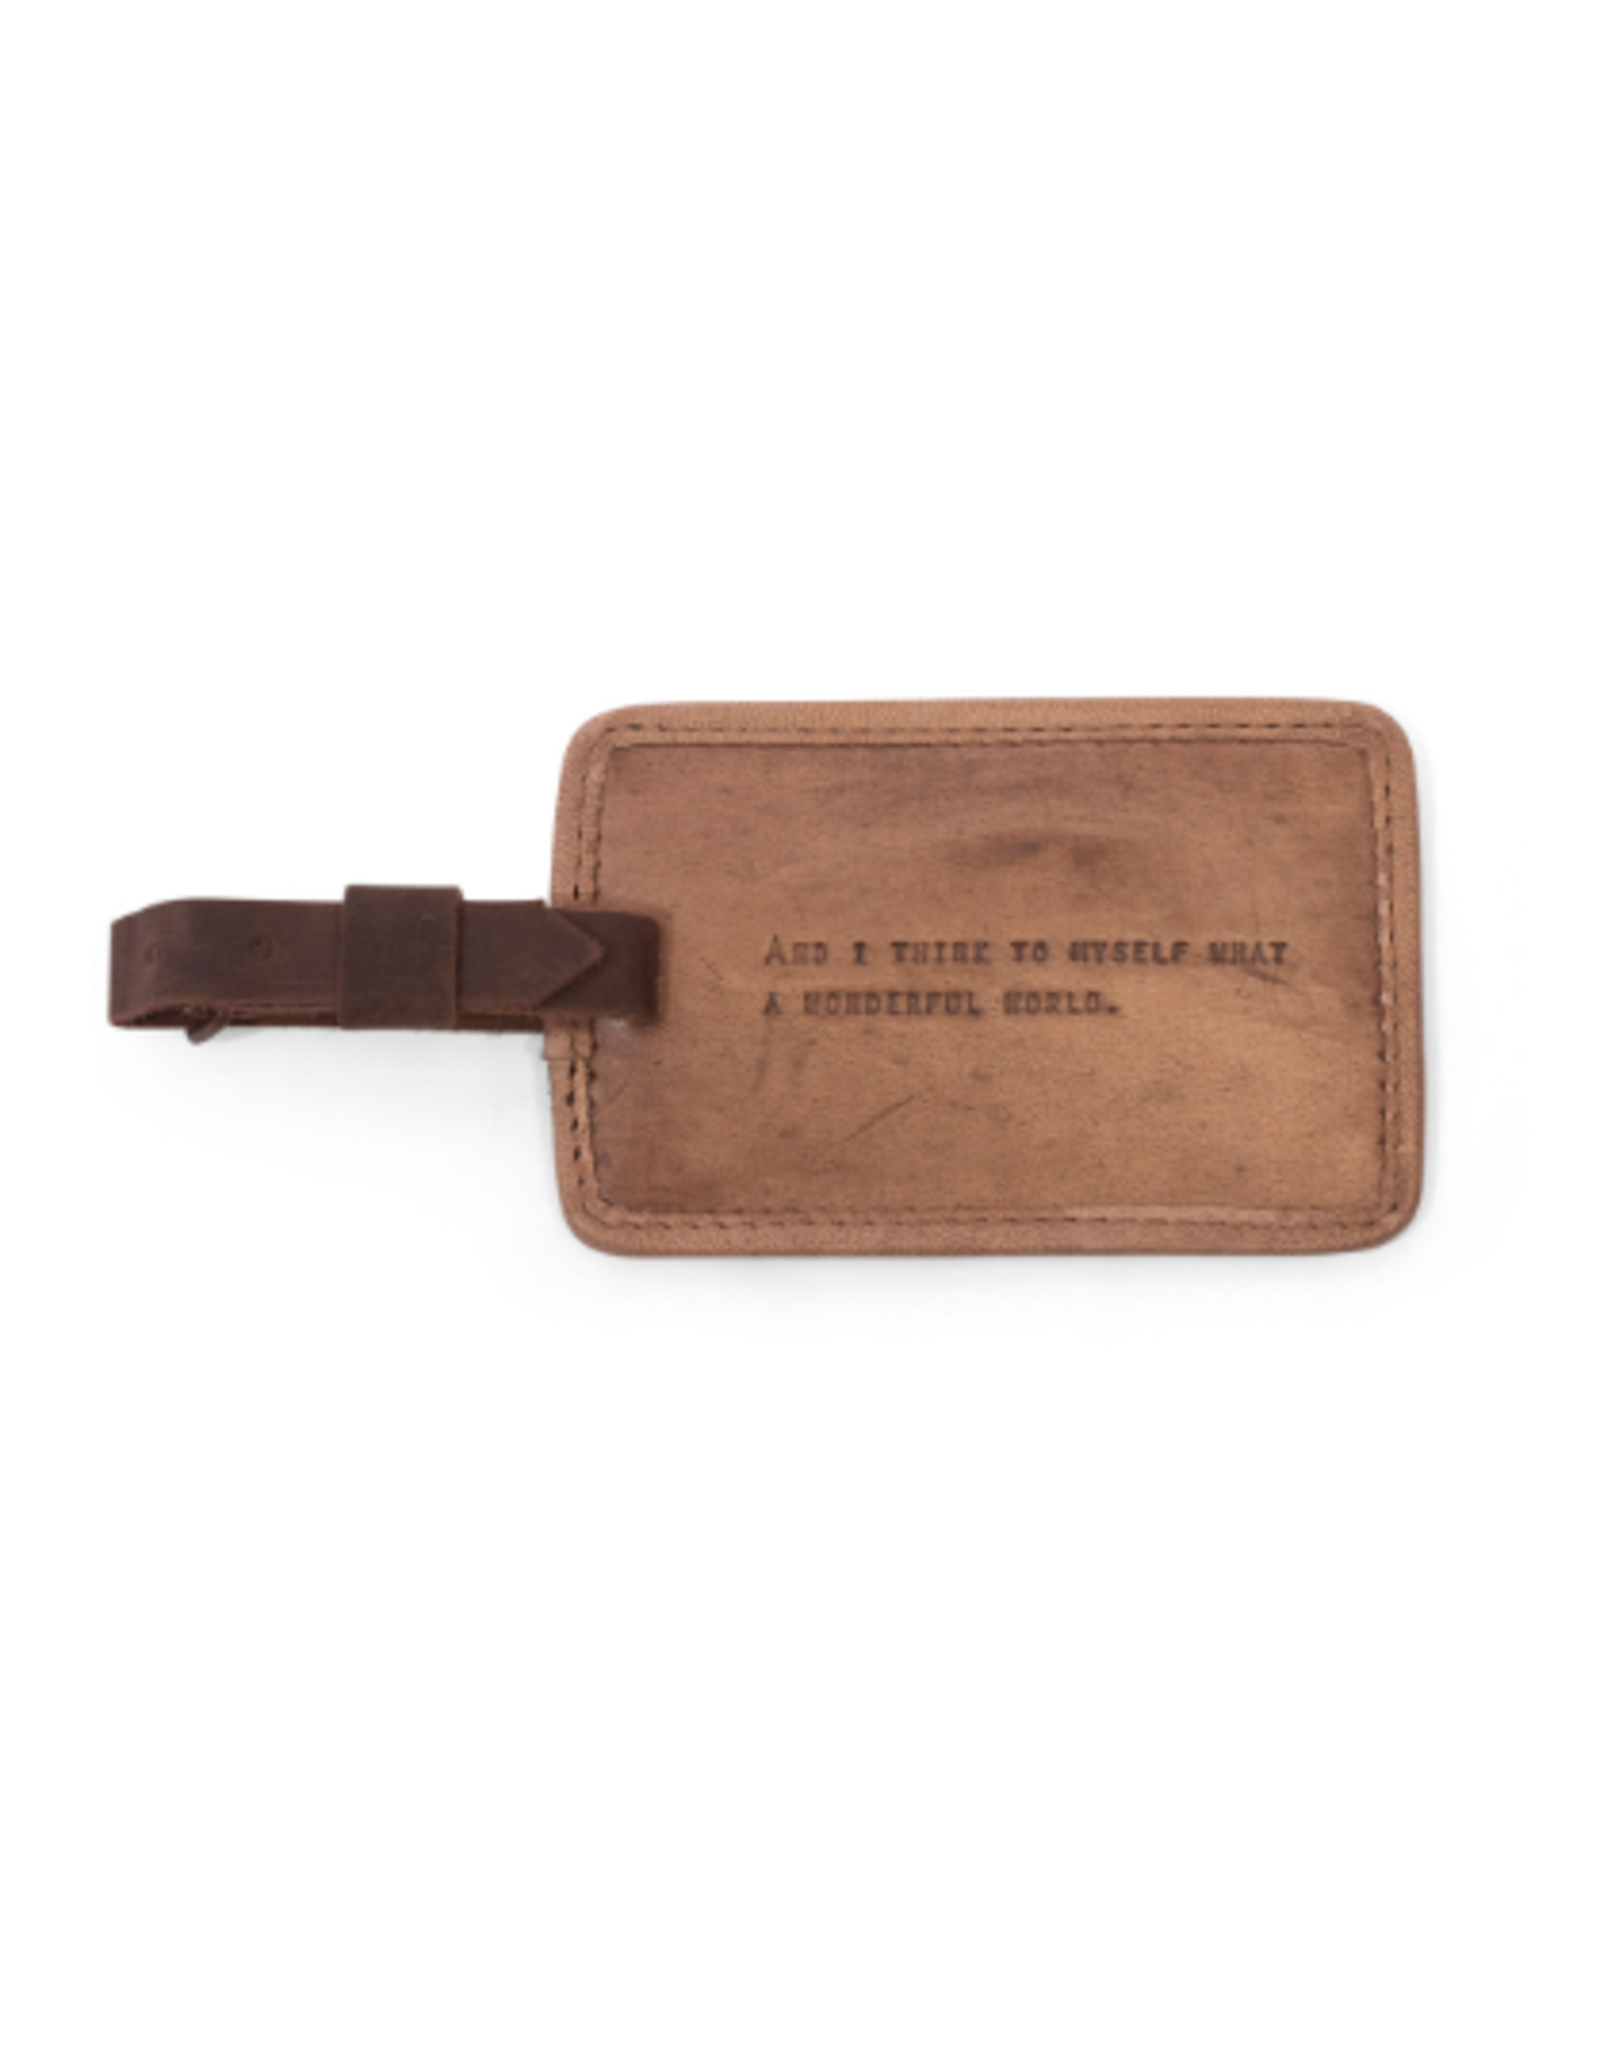 Sugarboo & Co Leather Luggage Tag, What A Wonderful World